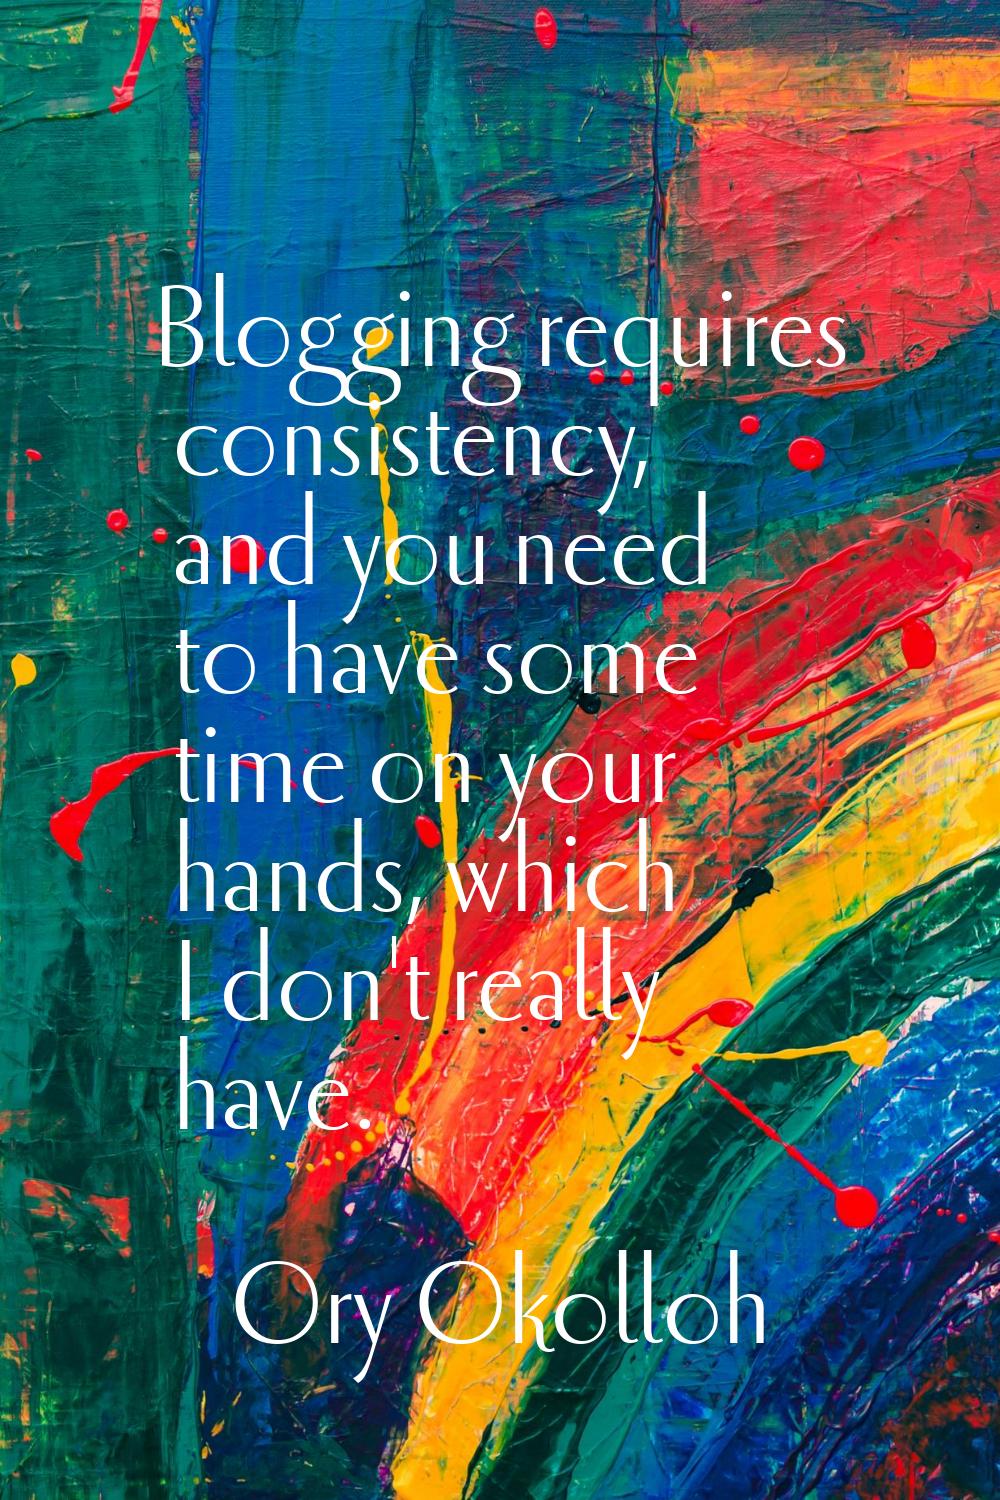 Blogging requires consistency, and you need to have some time on your hands, which I don't really h